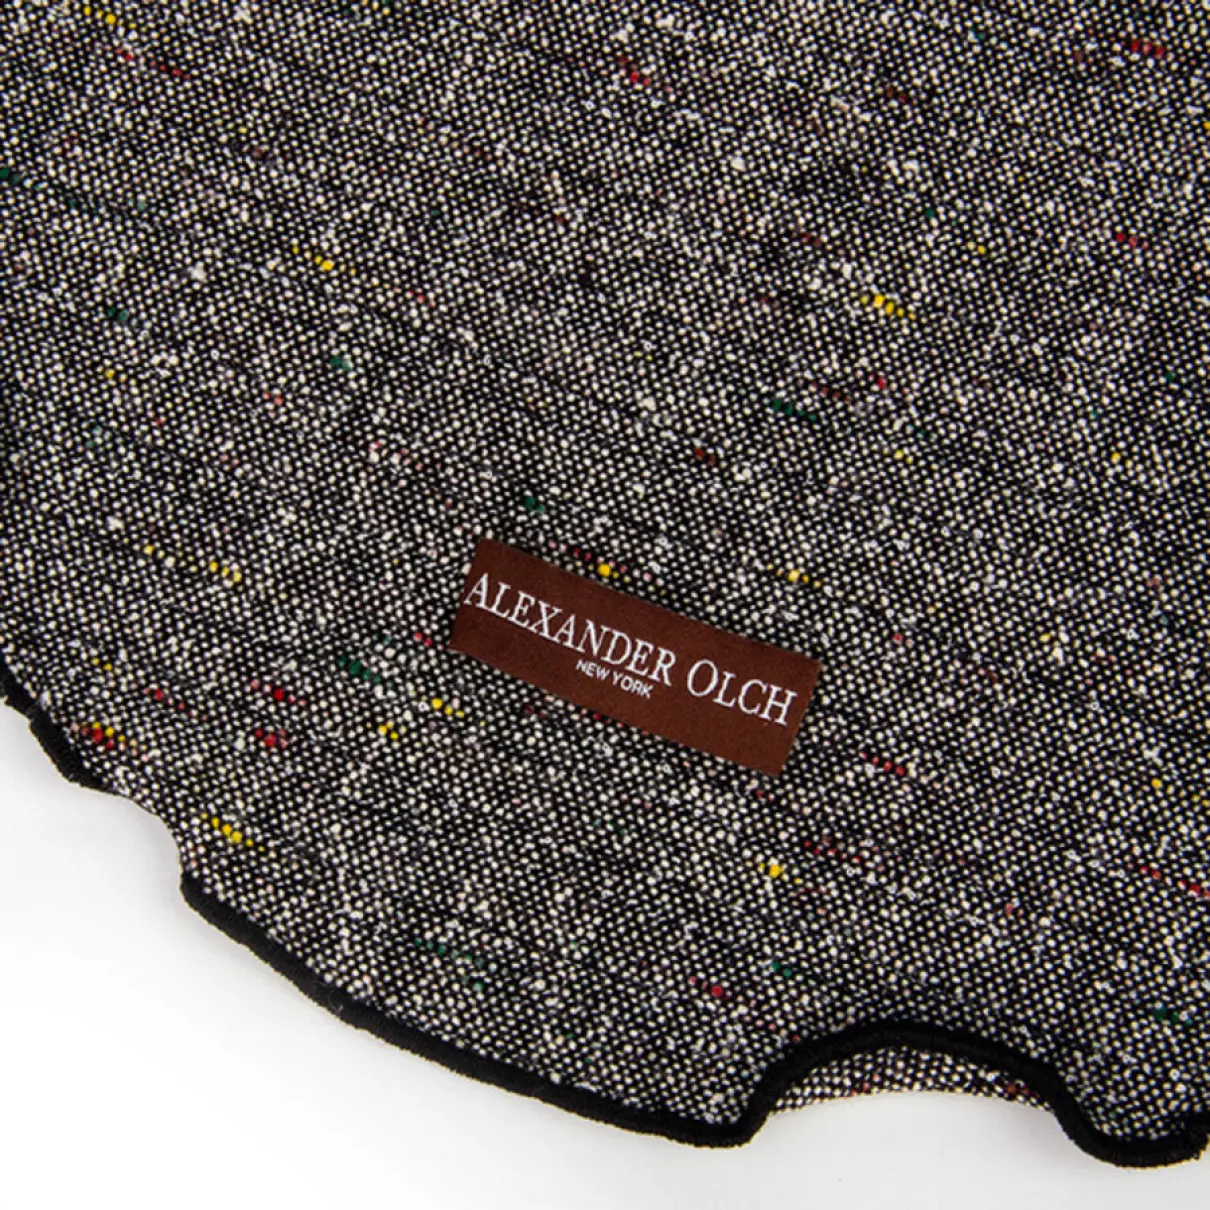 Buy Alexander Olch Wool scarf & pocket square online